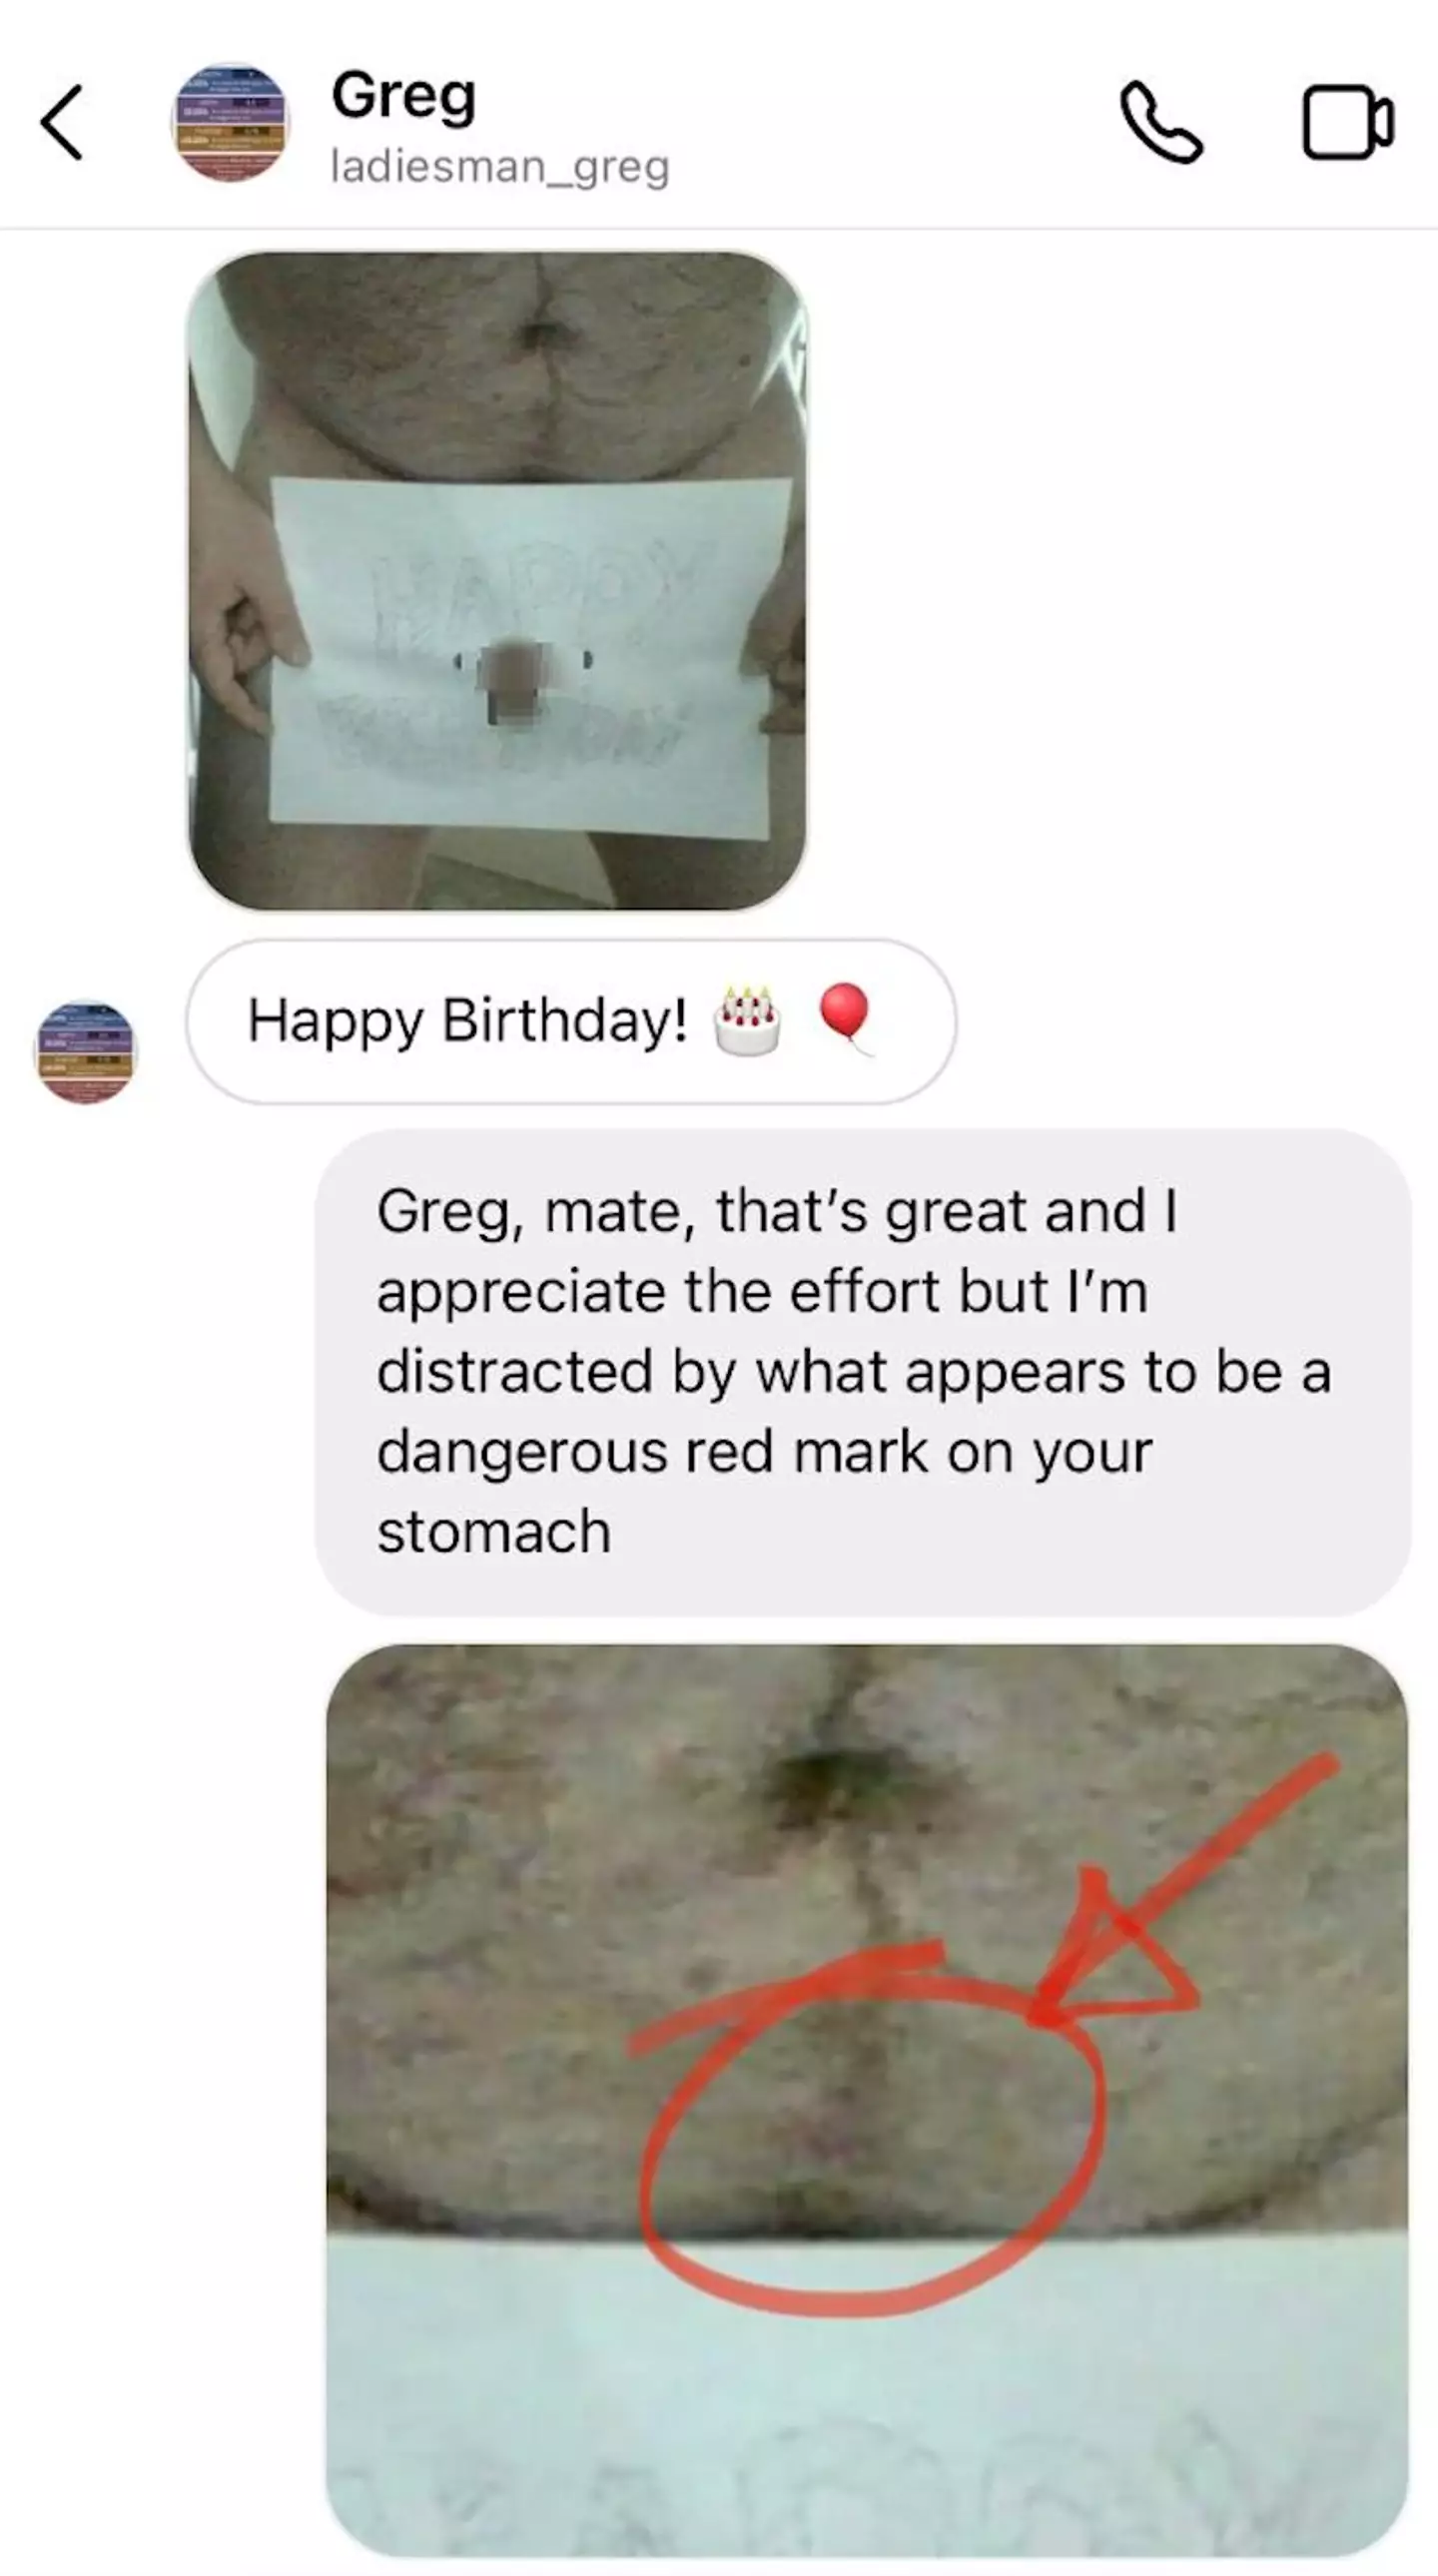 Greg sent an unsolicited picture of his manhood through a happy birthday sign.